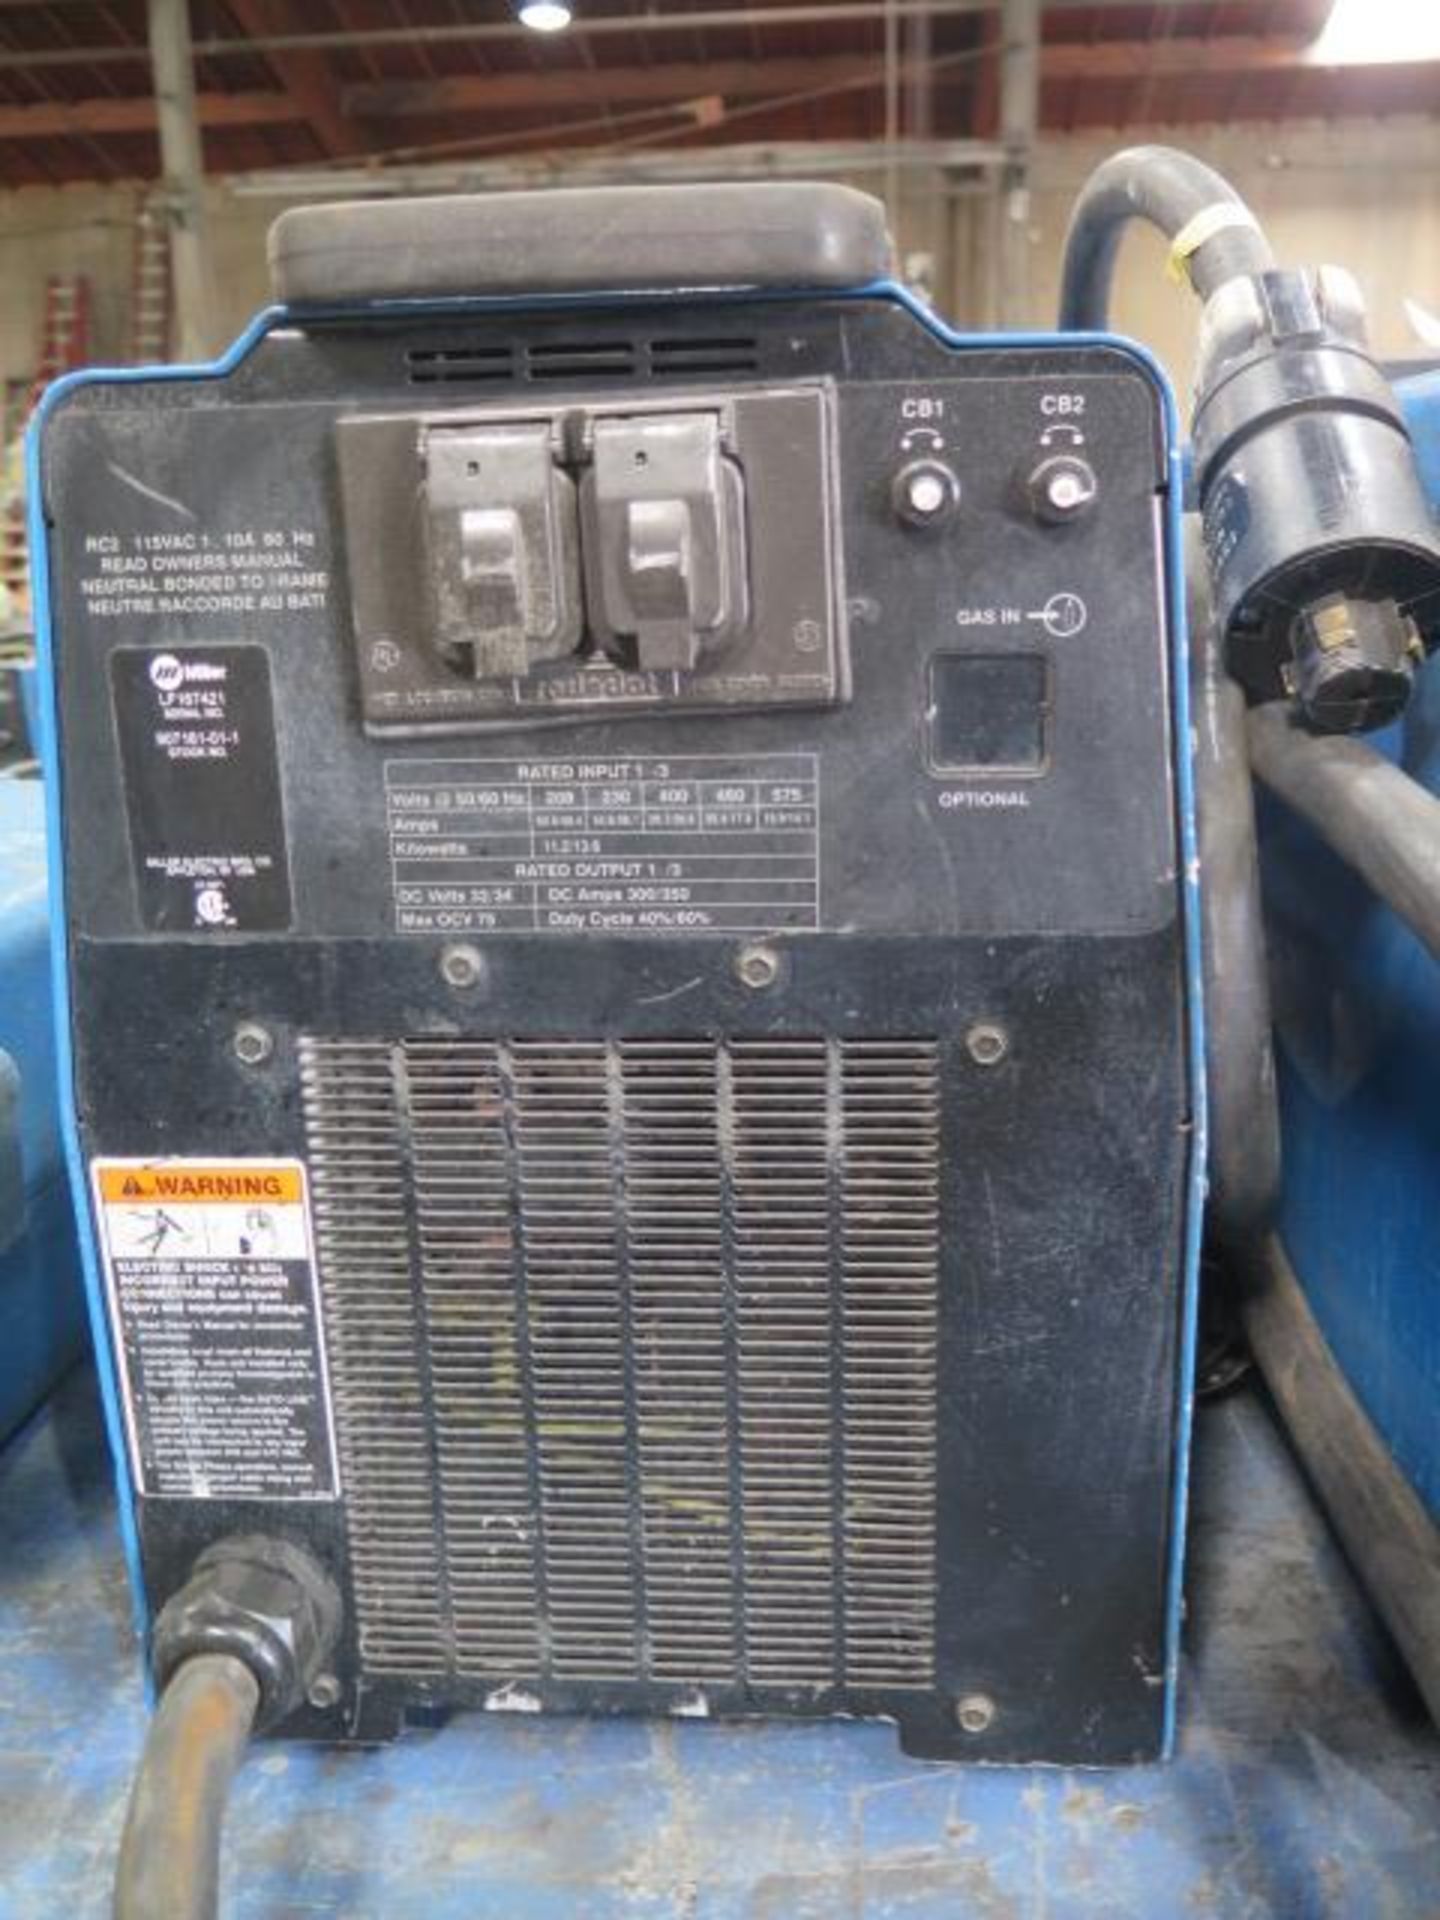 Miller XMT-350 CC-CV Arc Welding Power Source (SOLD AS-IS - NO WARRANTY) - Image 3 of 6